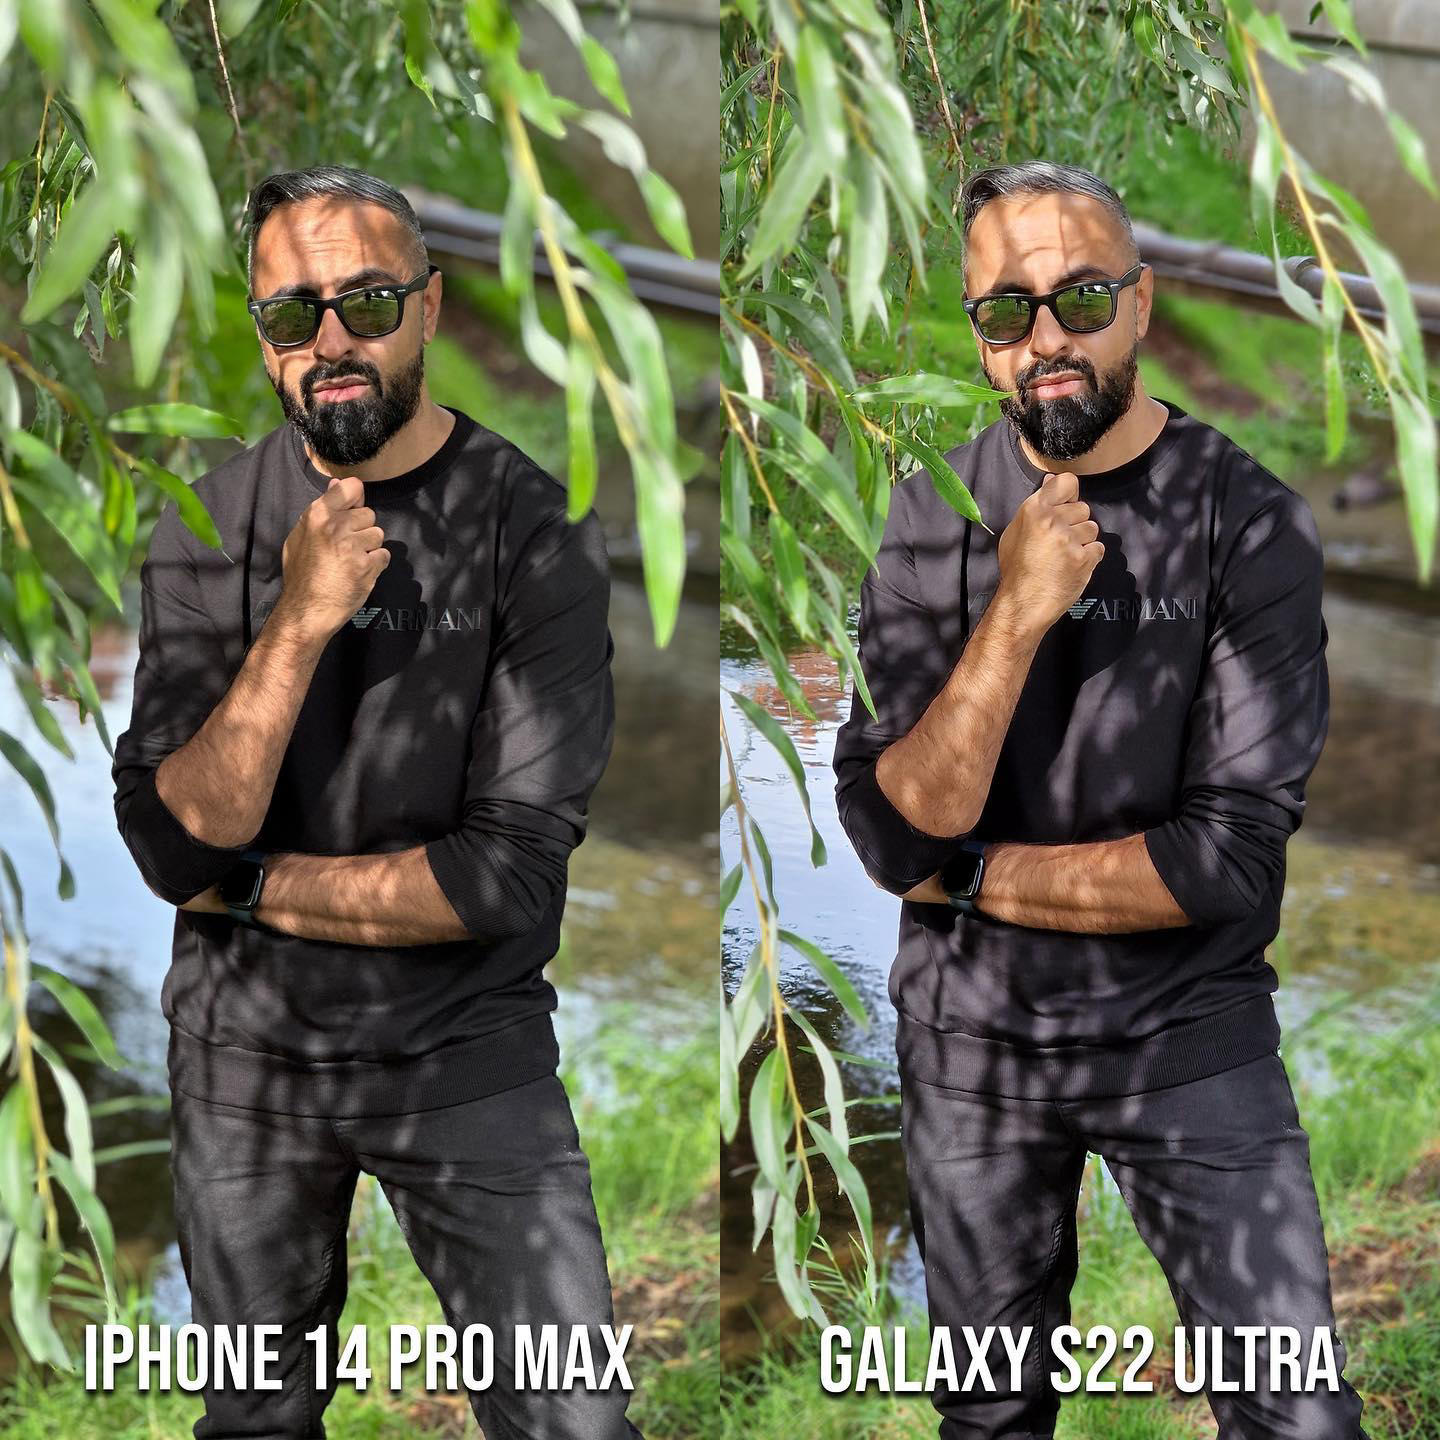 SuperSaf - iPhone 14 Pro Max or Samsung Galaxy S22 Ultra